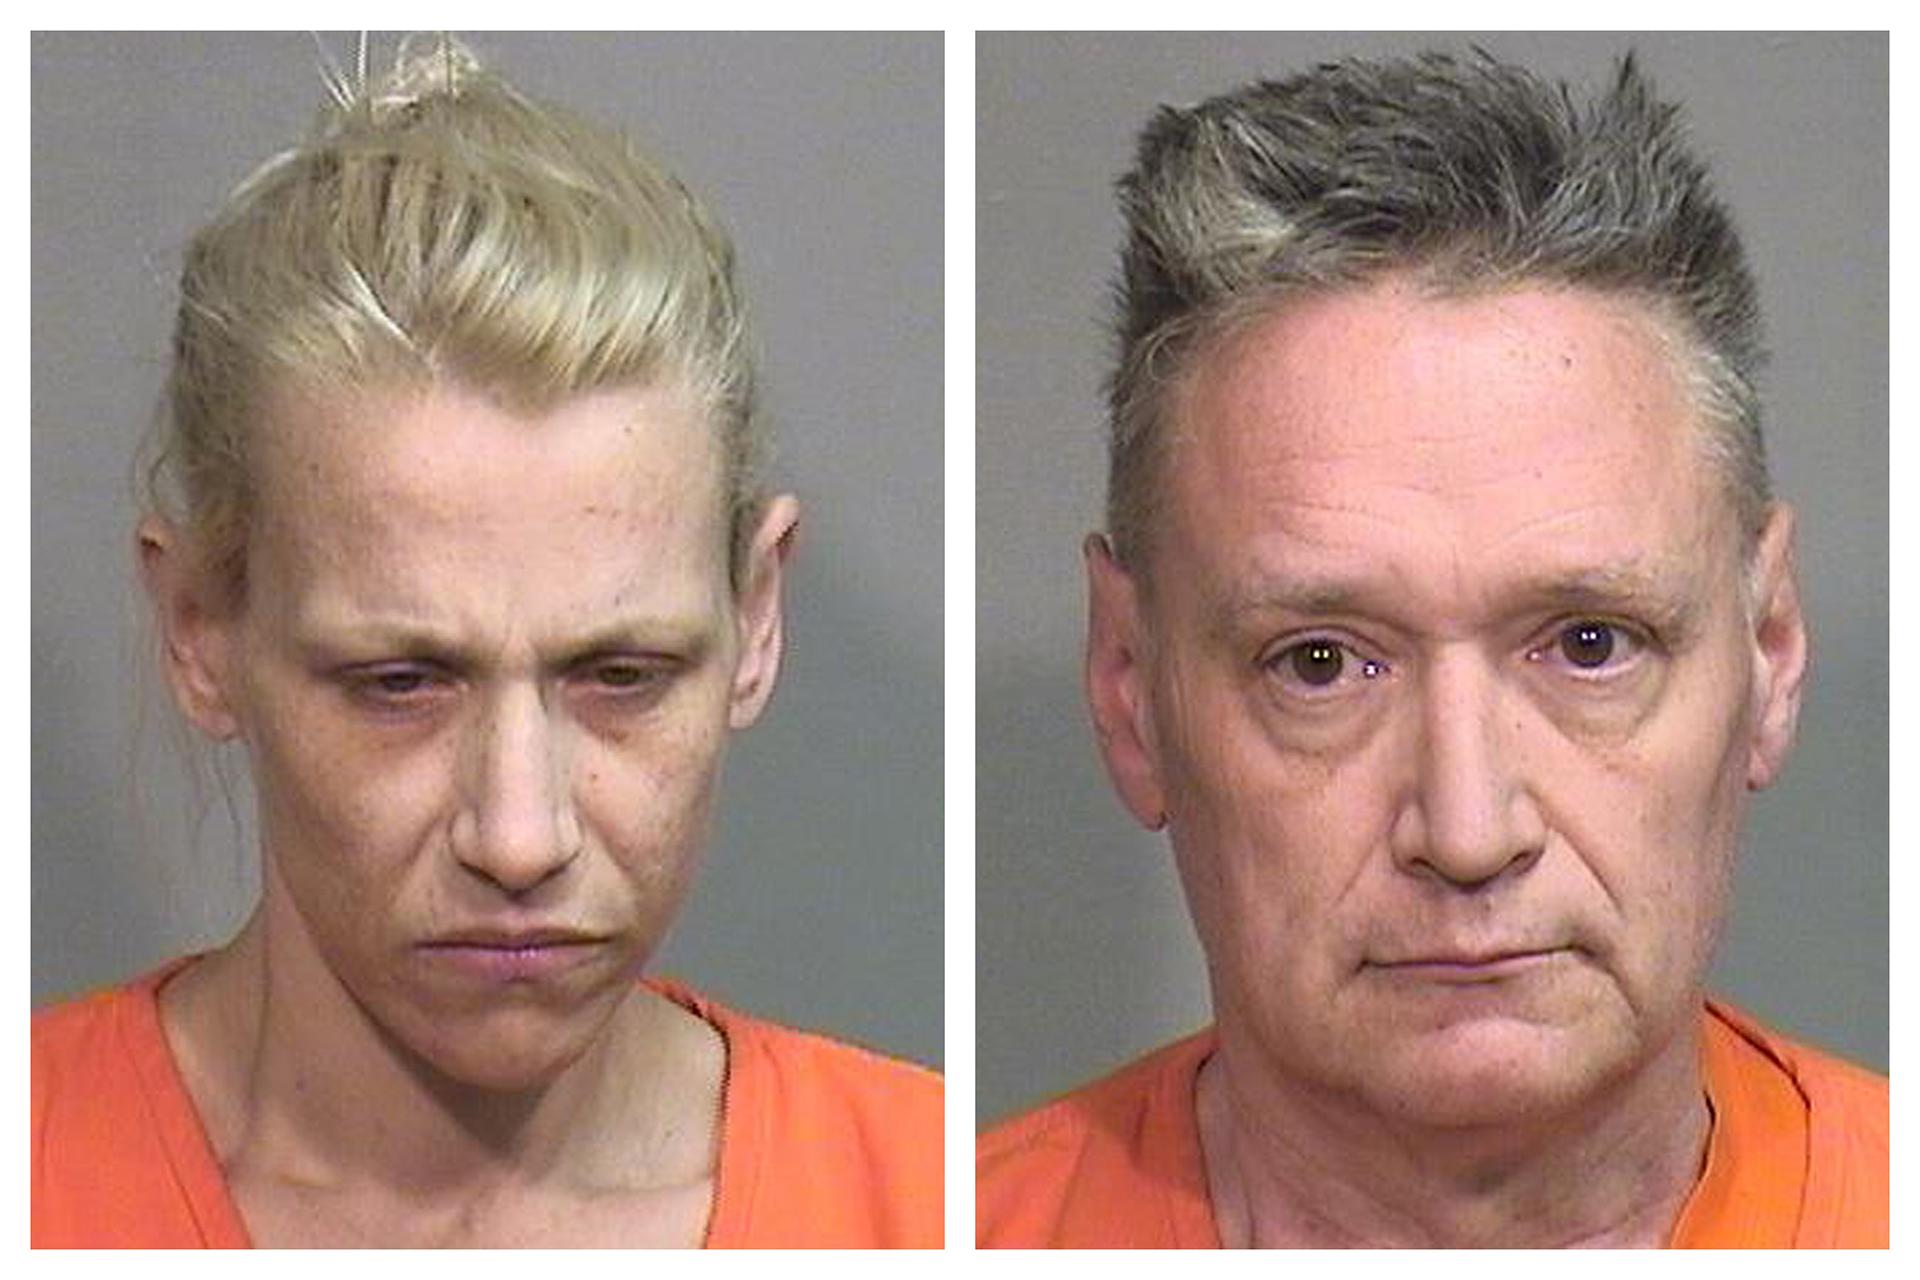 This combination of undated photos provided by the McHenry County Sheriff's Department in Woodstock, Ill., on Thursday, April 25, 2019 shows JoAnn Cunningham, left, and Andrew Freund Sr. (McHenry County Sheriff's Department via AP)